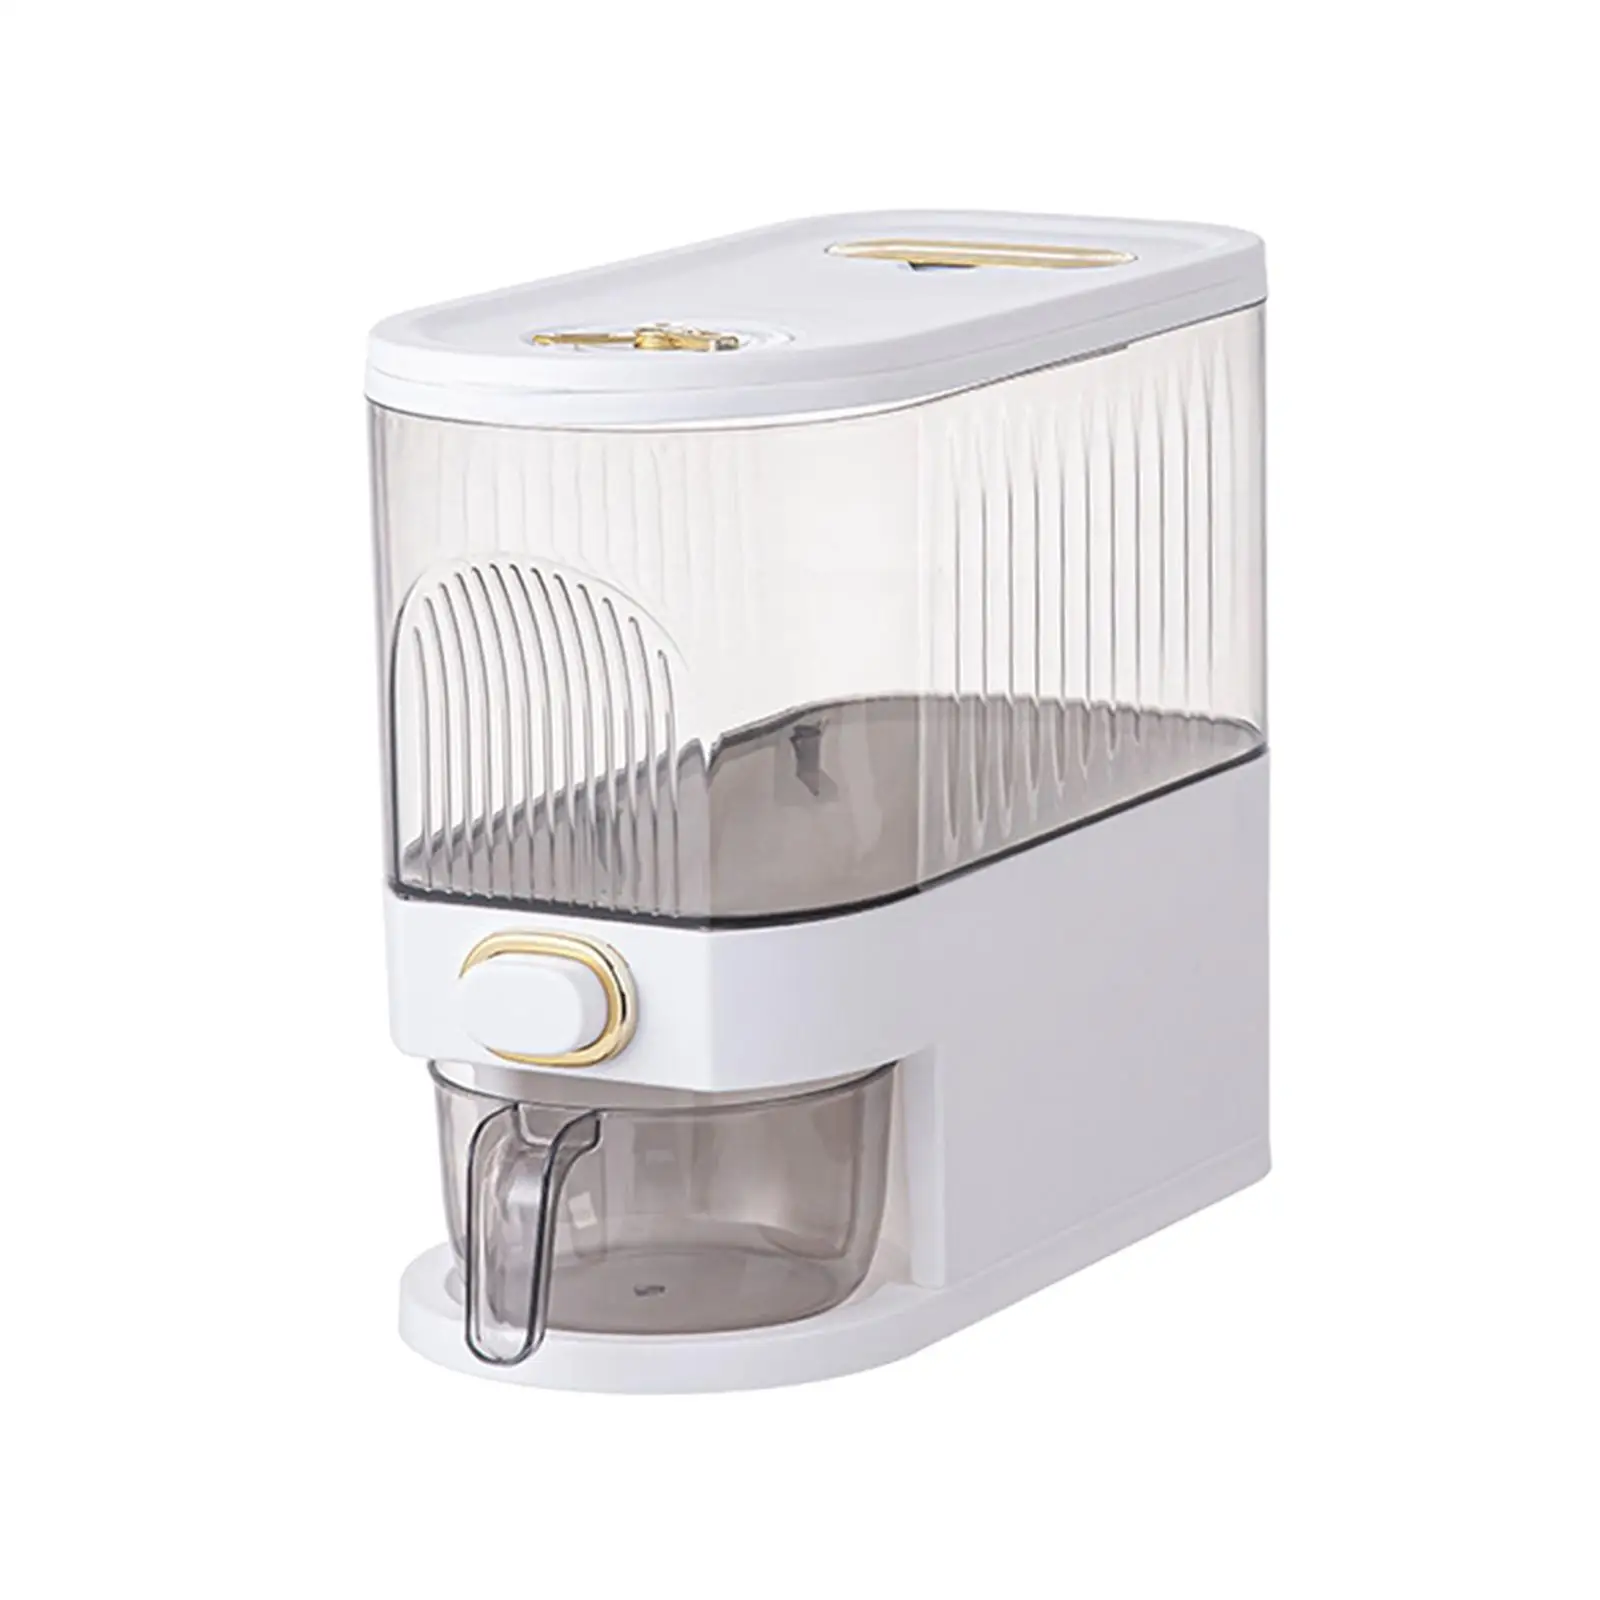 Rice Dispenser Container Storage Box Food Dispenser Countertop Rice Dispenser for Grain Flour Dry Food Soybean Household